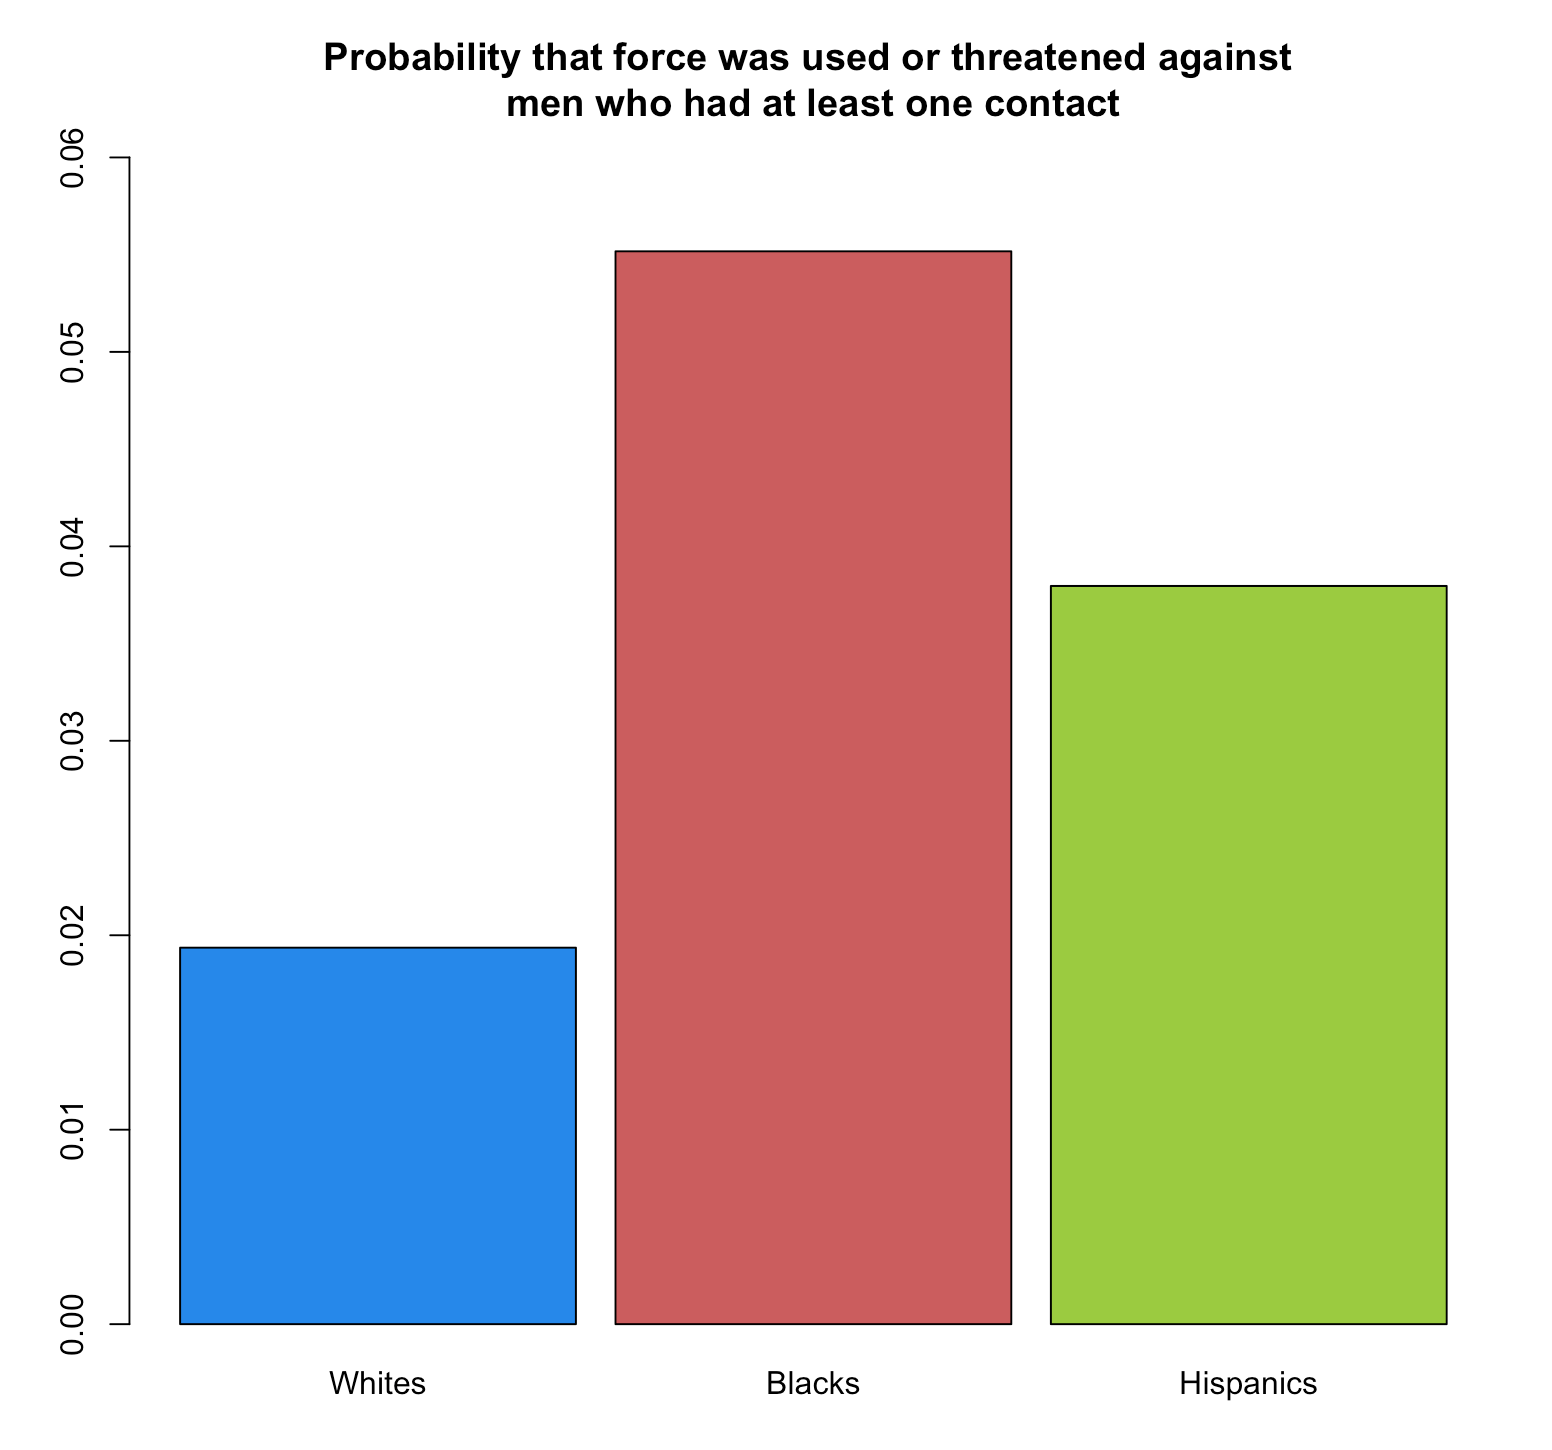 Probability-that-force-was-used-or-threatened-against-men-who-had-at-least-one-contact.png